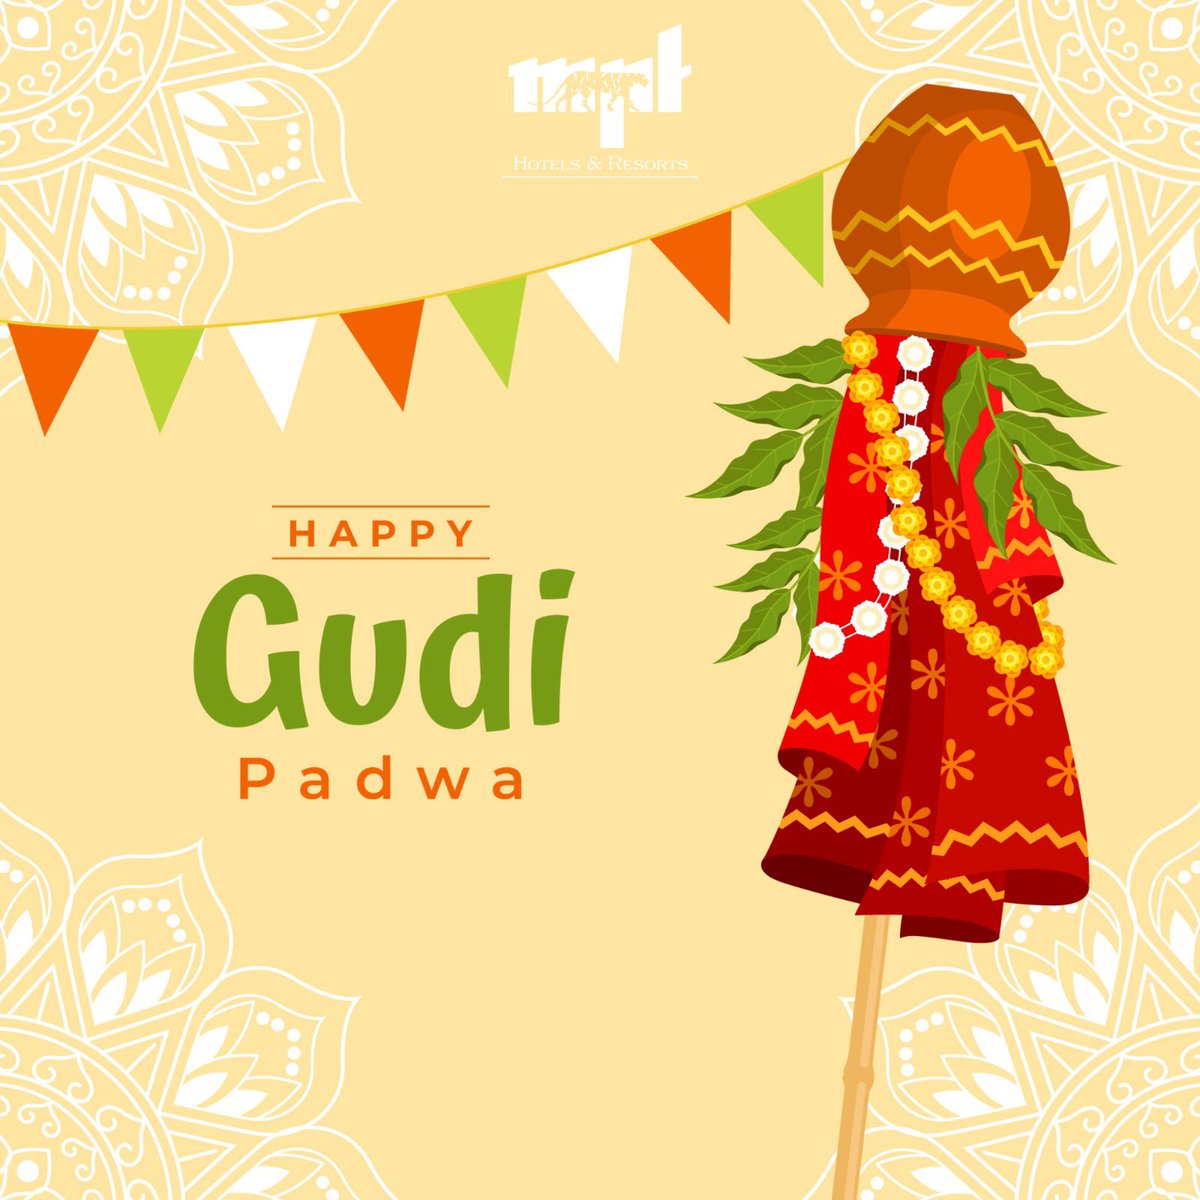 Wishing you abundant blessings and joy on the auspicious occasion of Hindu New Year, Gudi Padwa, Ugadi, and Cheti Chand! May this new year bring prosperity, happiness, and success to you and your loved ones.

#CulturalHarmony #FestiveCheer #mpthotelsandresorts